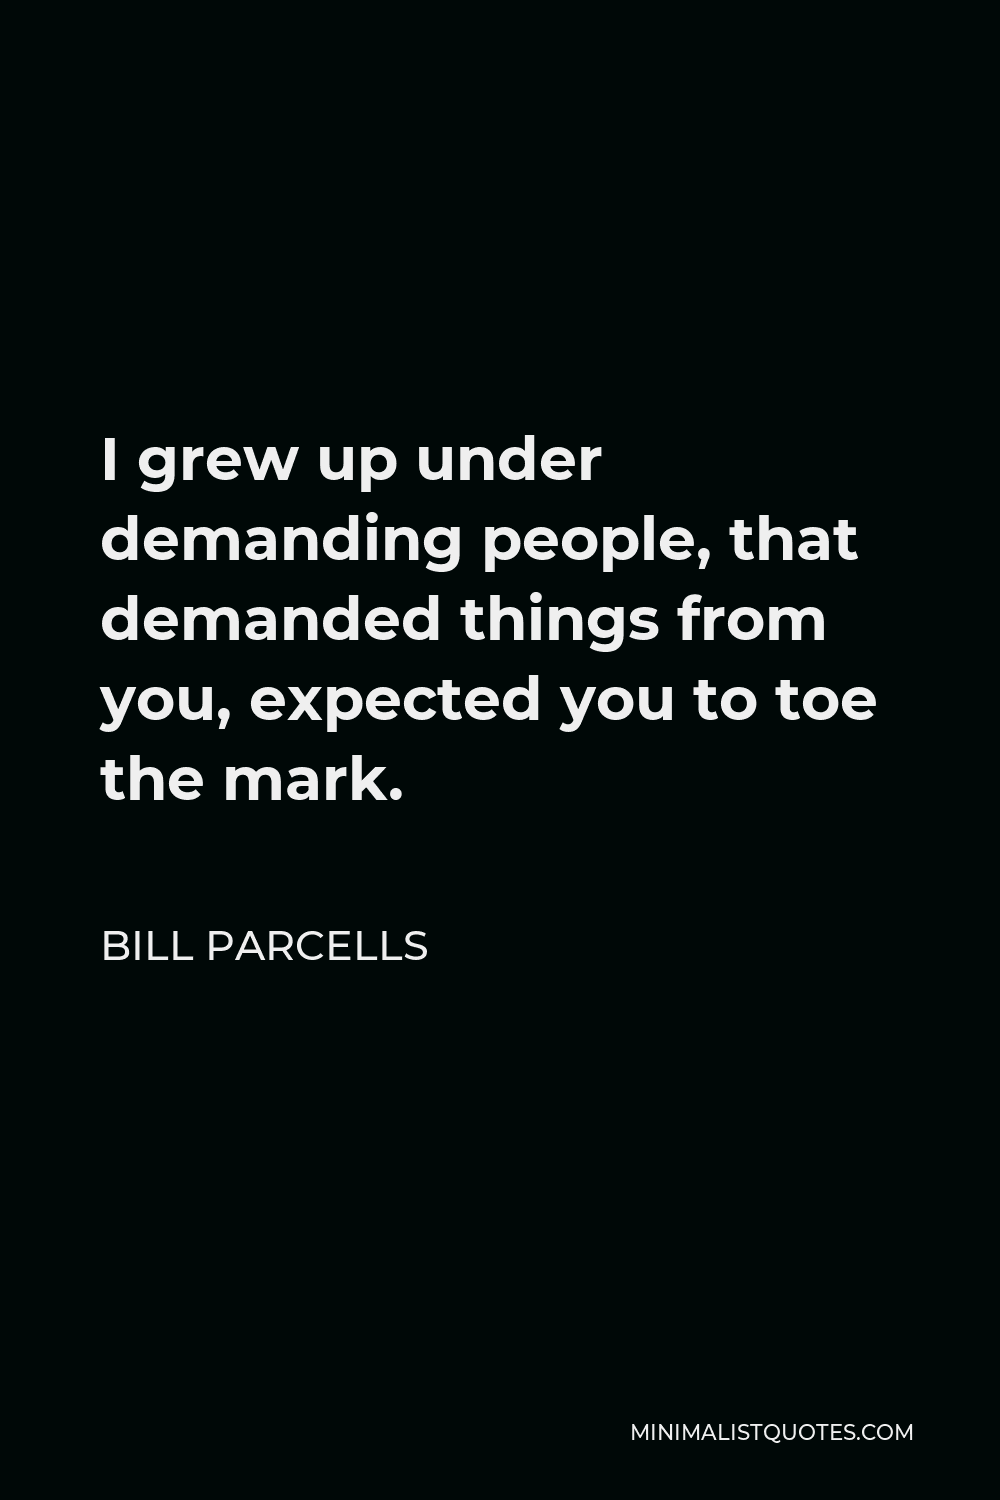 Bill Parcells Quote - I grew up under demanding people, that demanded things from you, expected you to toe the mark.